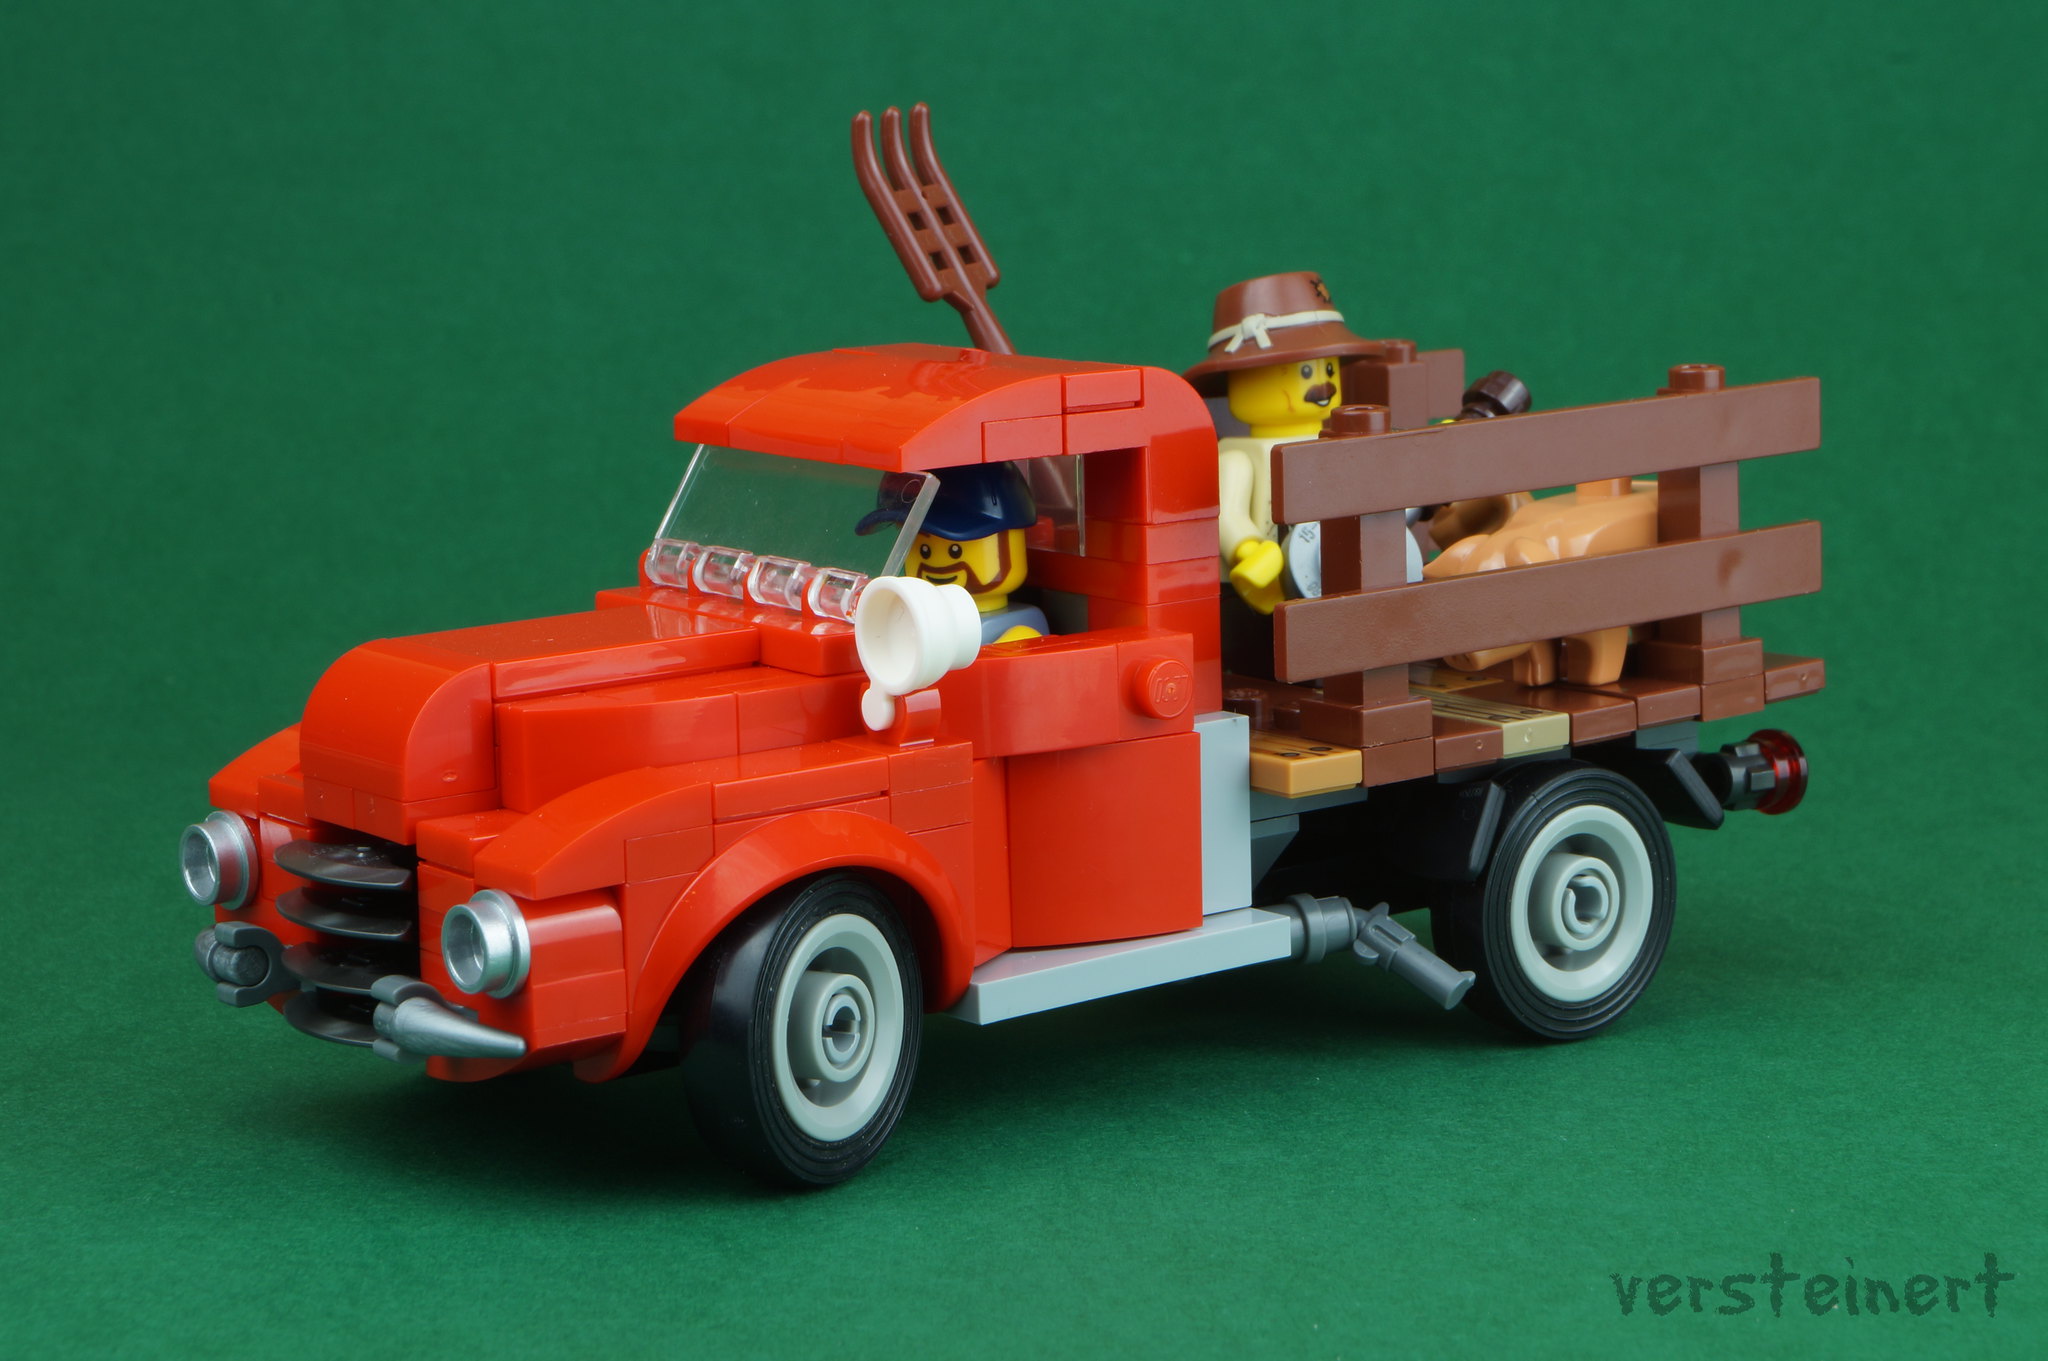 Chevy Advance inspired vintage truck